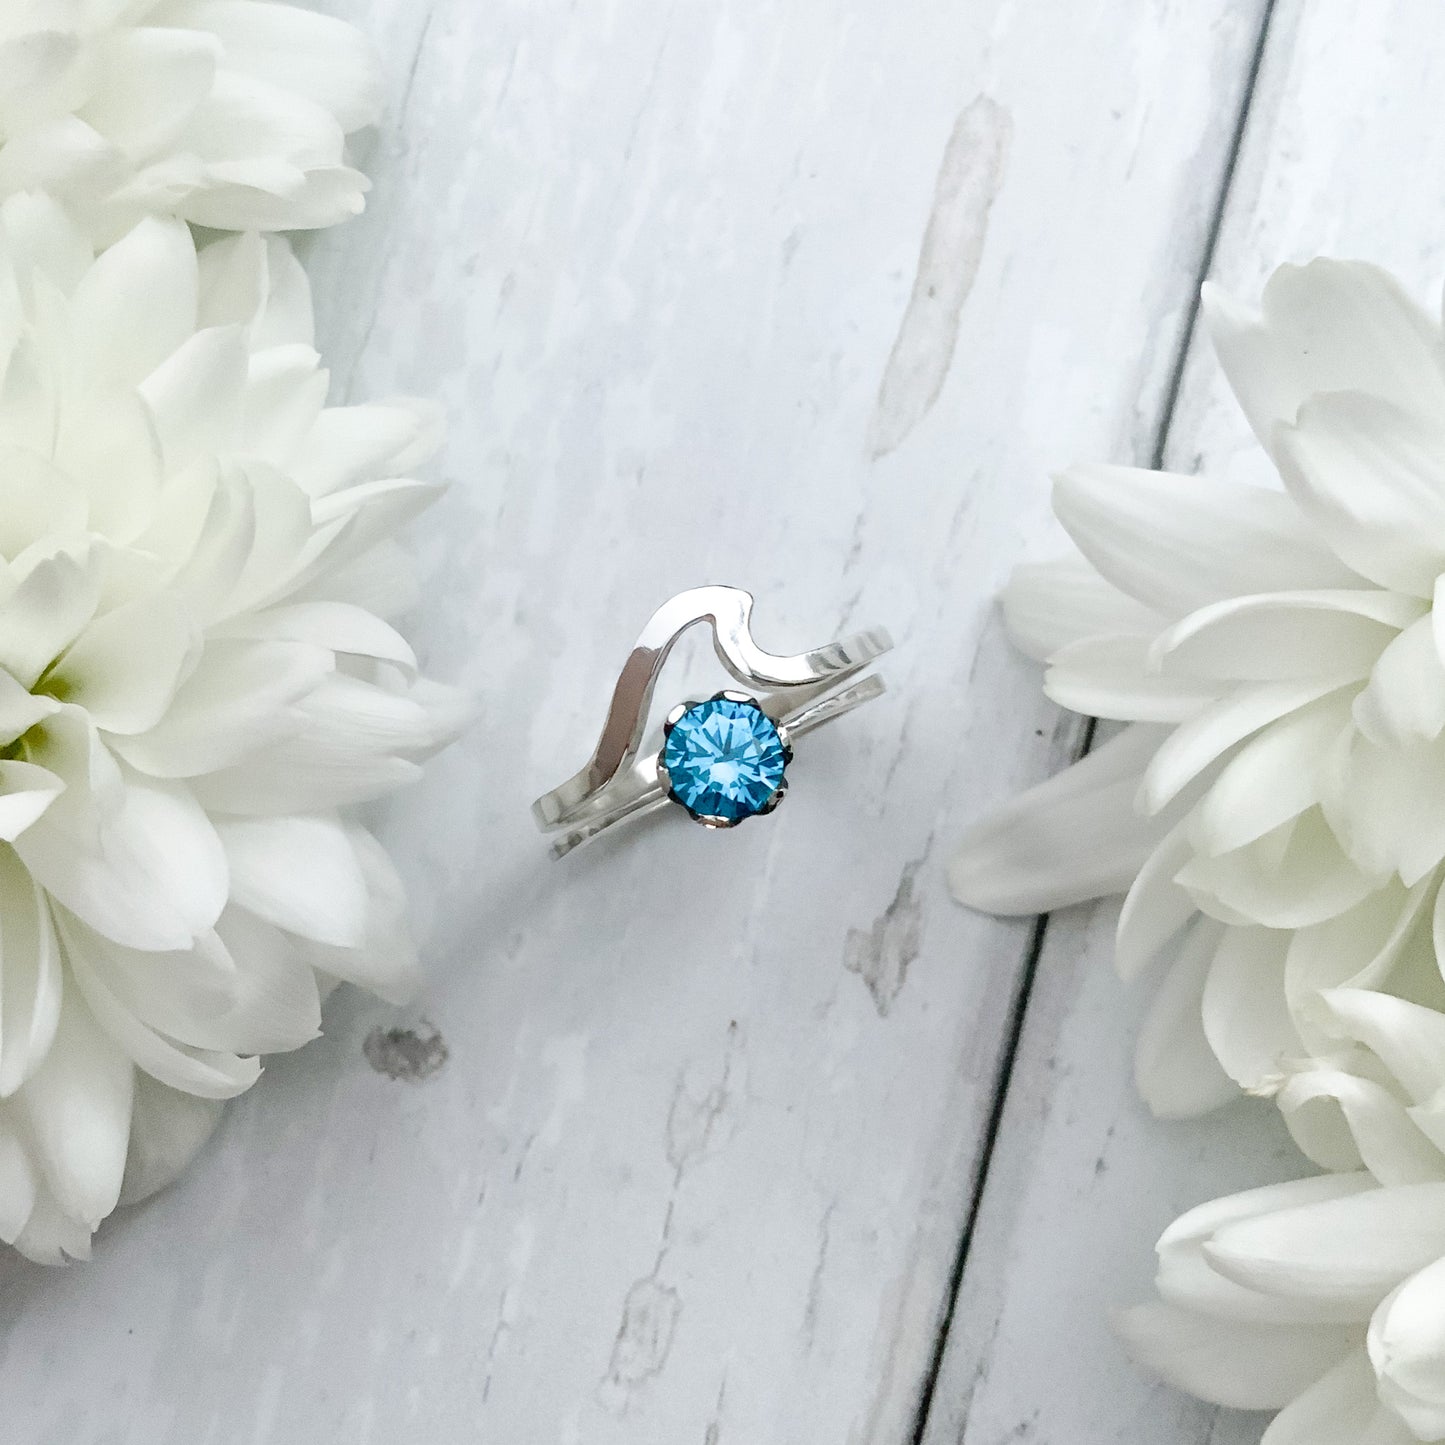 Vibrant blue solitaire ring UK size P